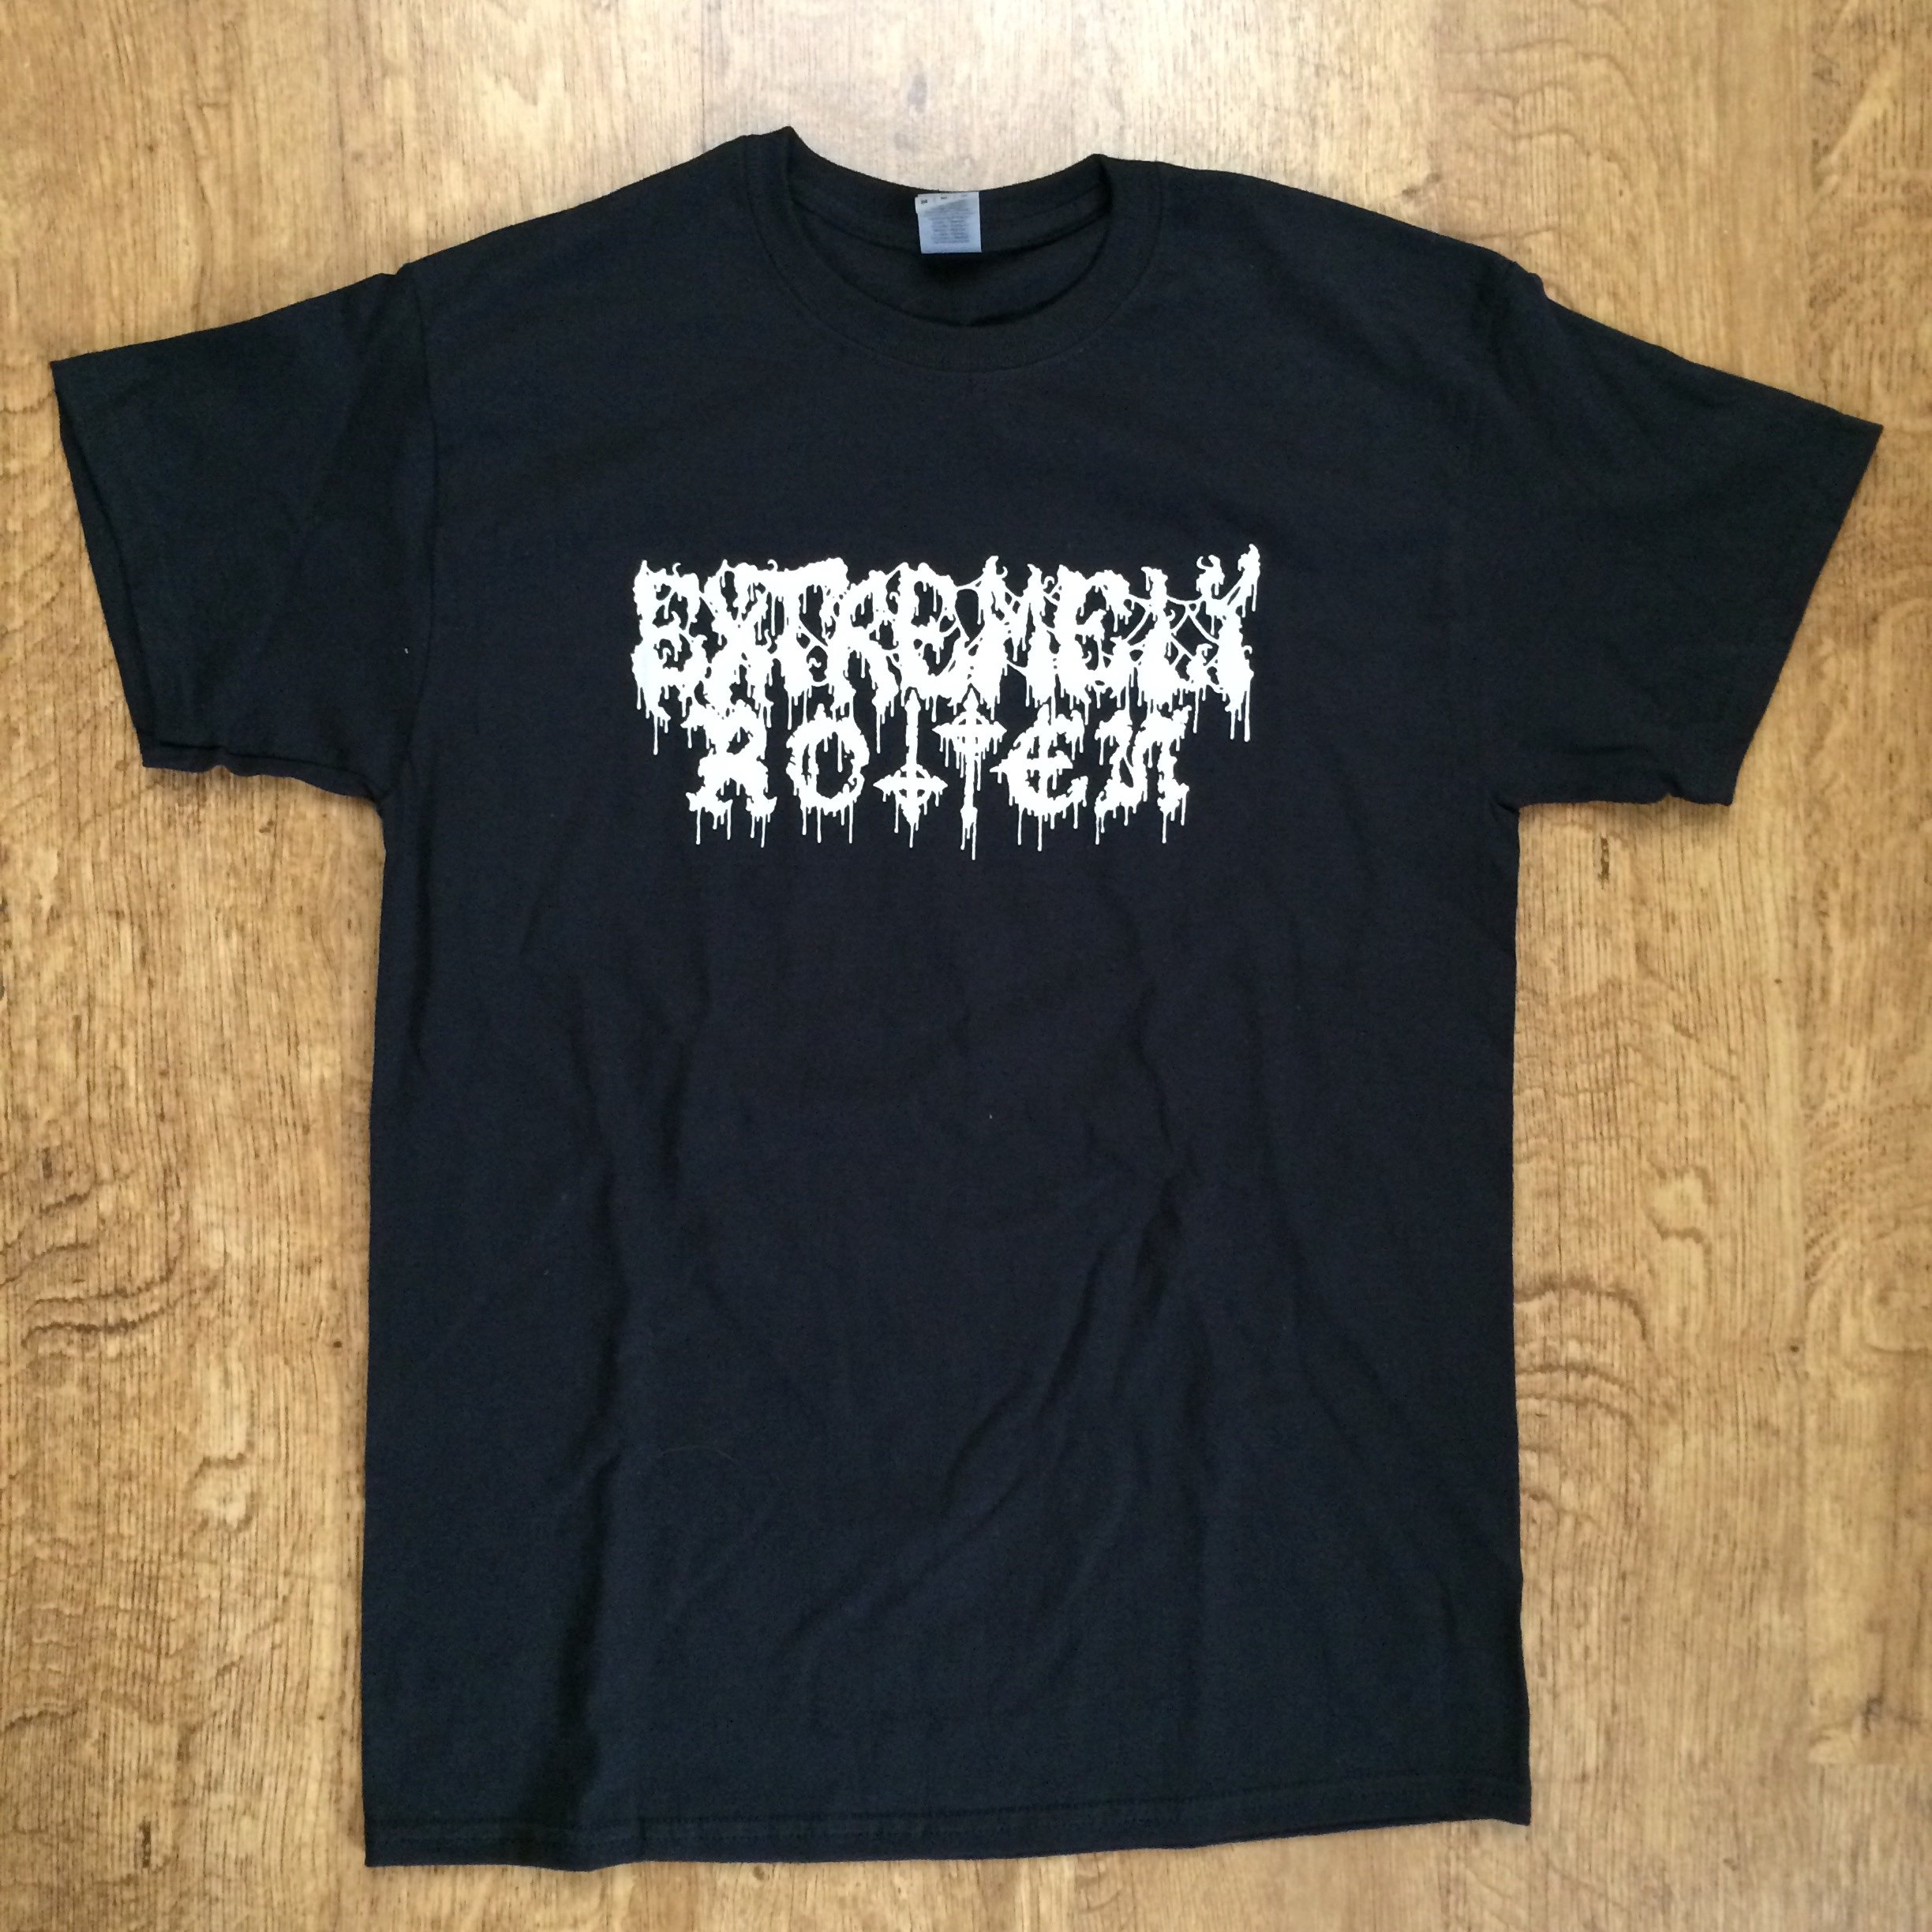 Photo of the Extremely Rotten Productions T-shirt (black)